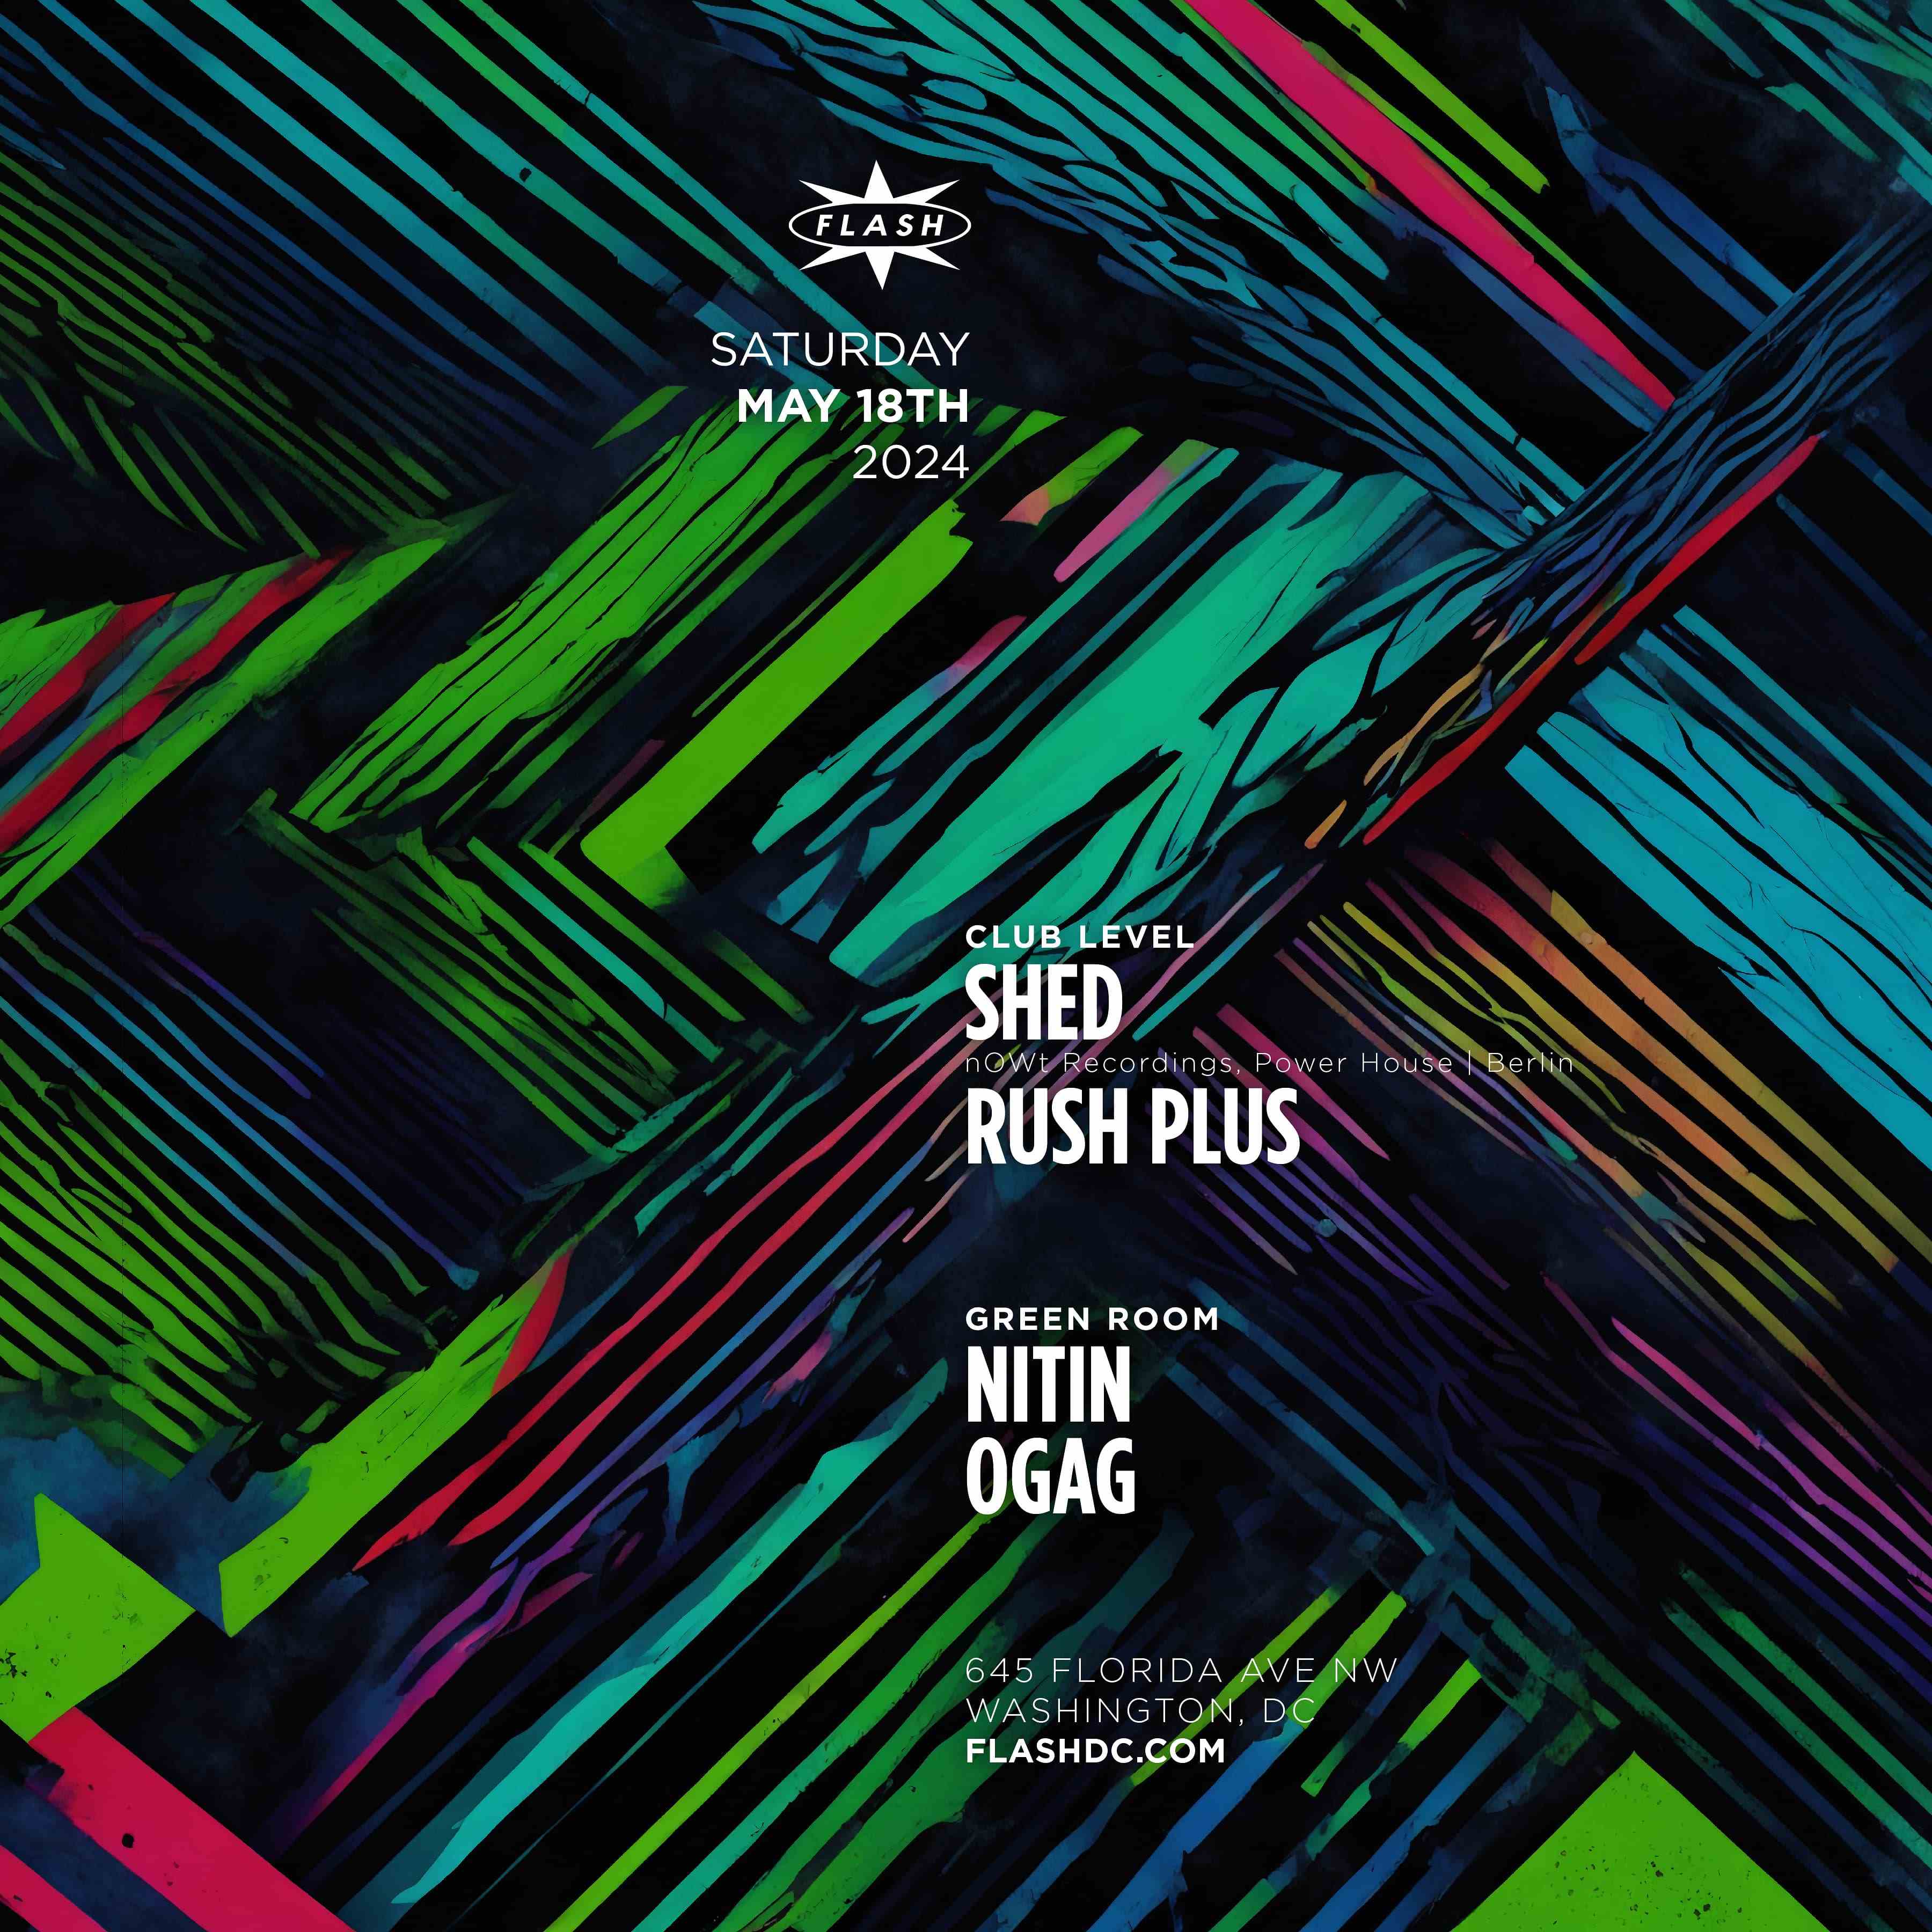 Shed event flyer